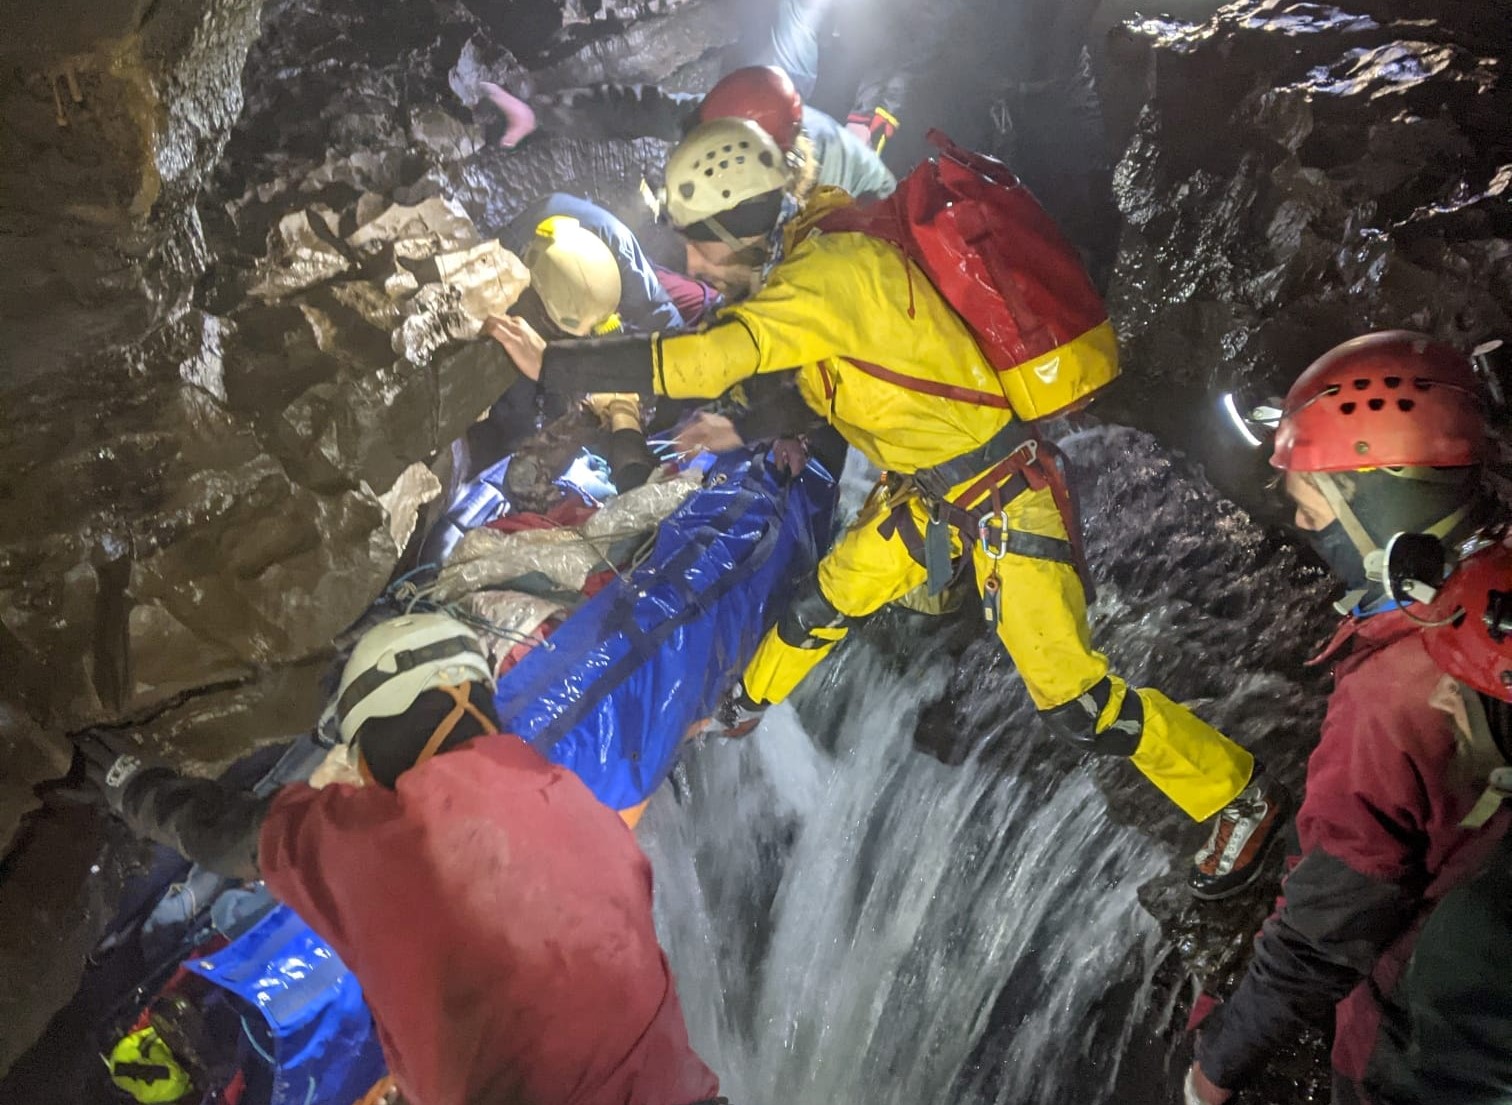 NEWS | Dramatic photos show moment man was rescued from cave in South Wales